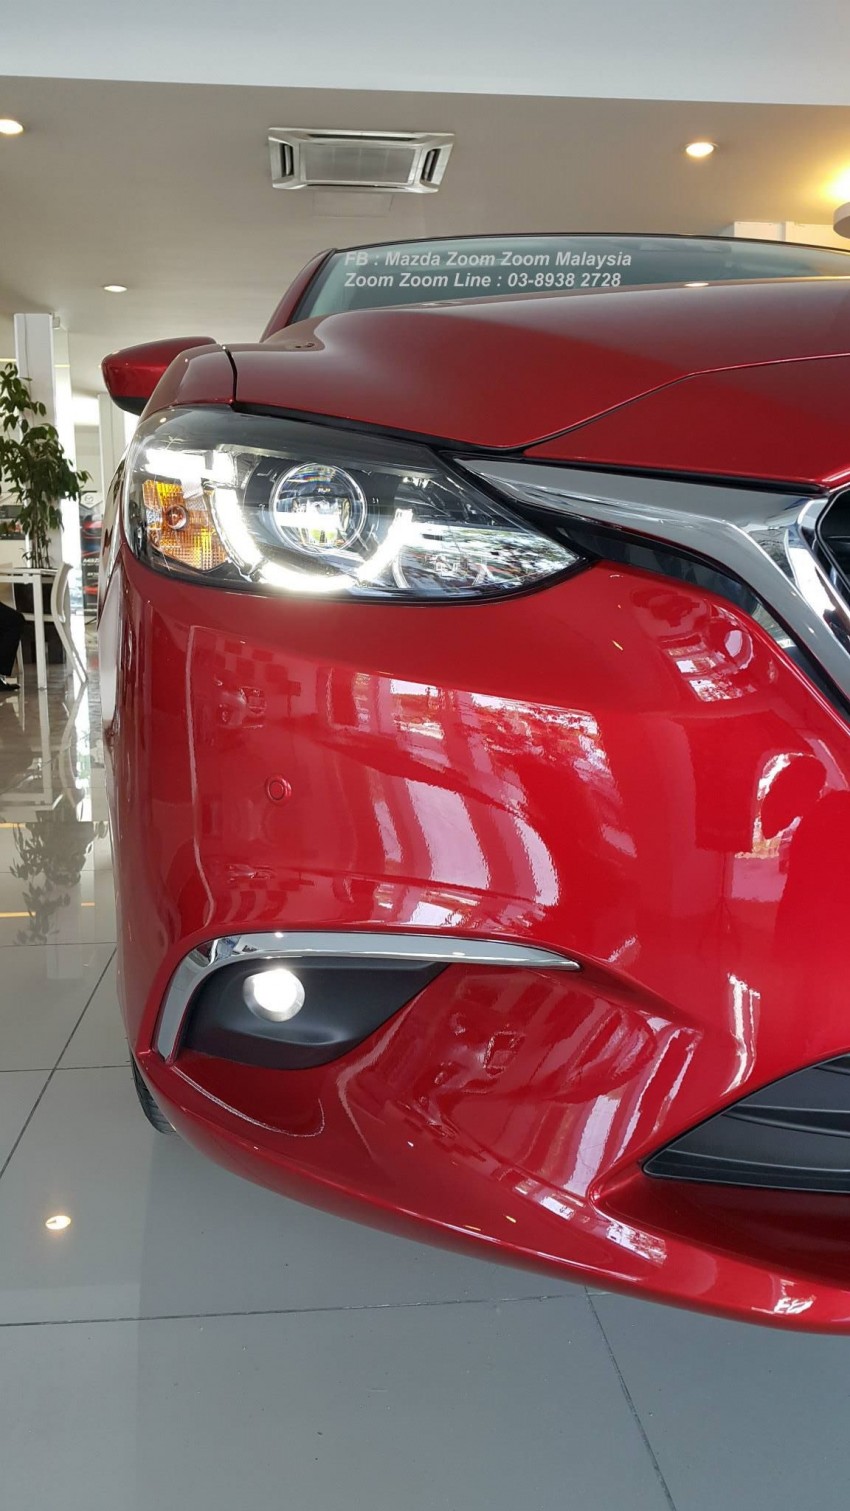 Mazda 6 facelift now here – 2.0 and 2.5, RM160k-199k 329758